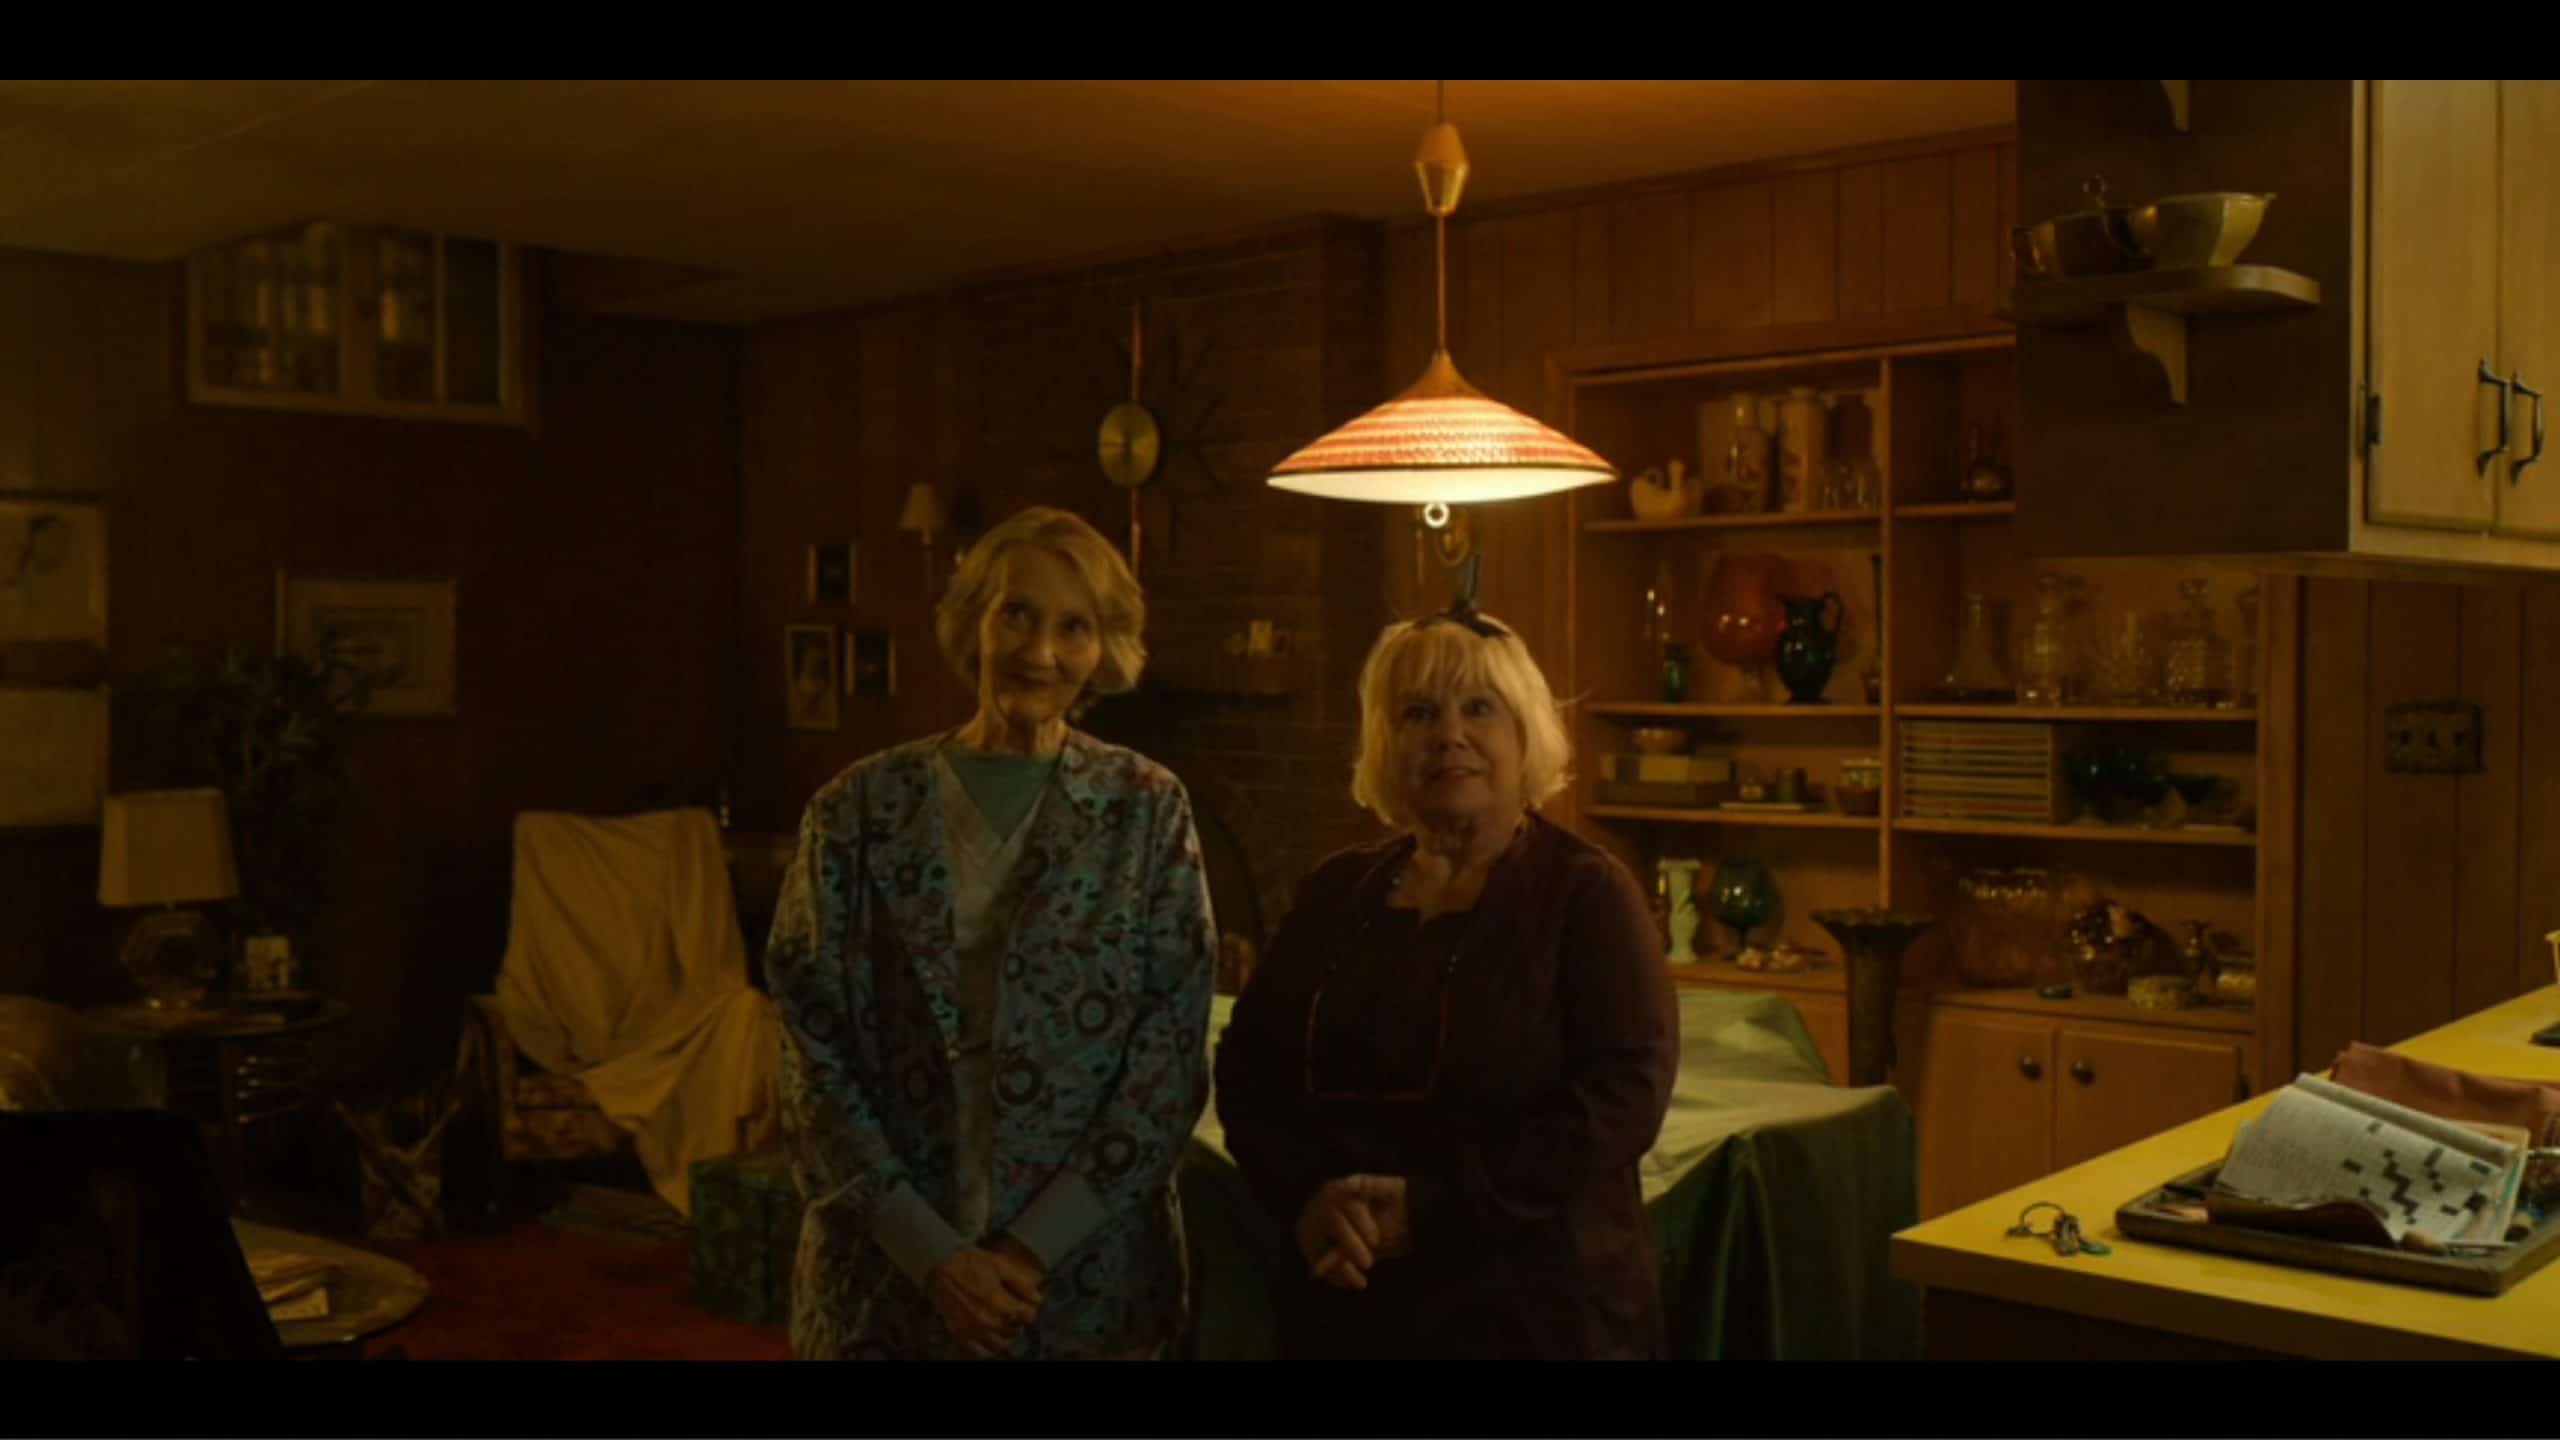 Roberta (Barbara Kingsley) and Beverly (Denny Dillon) standing in their apartment